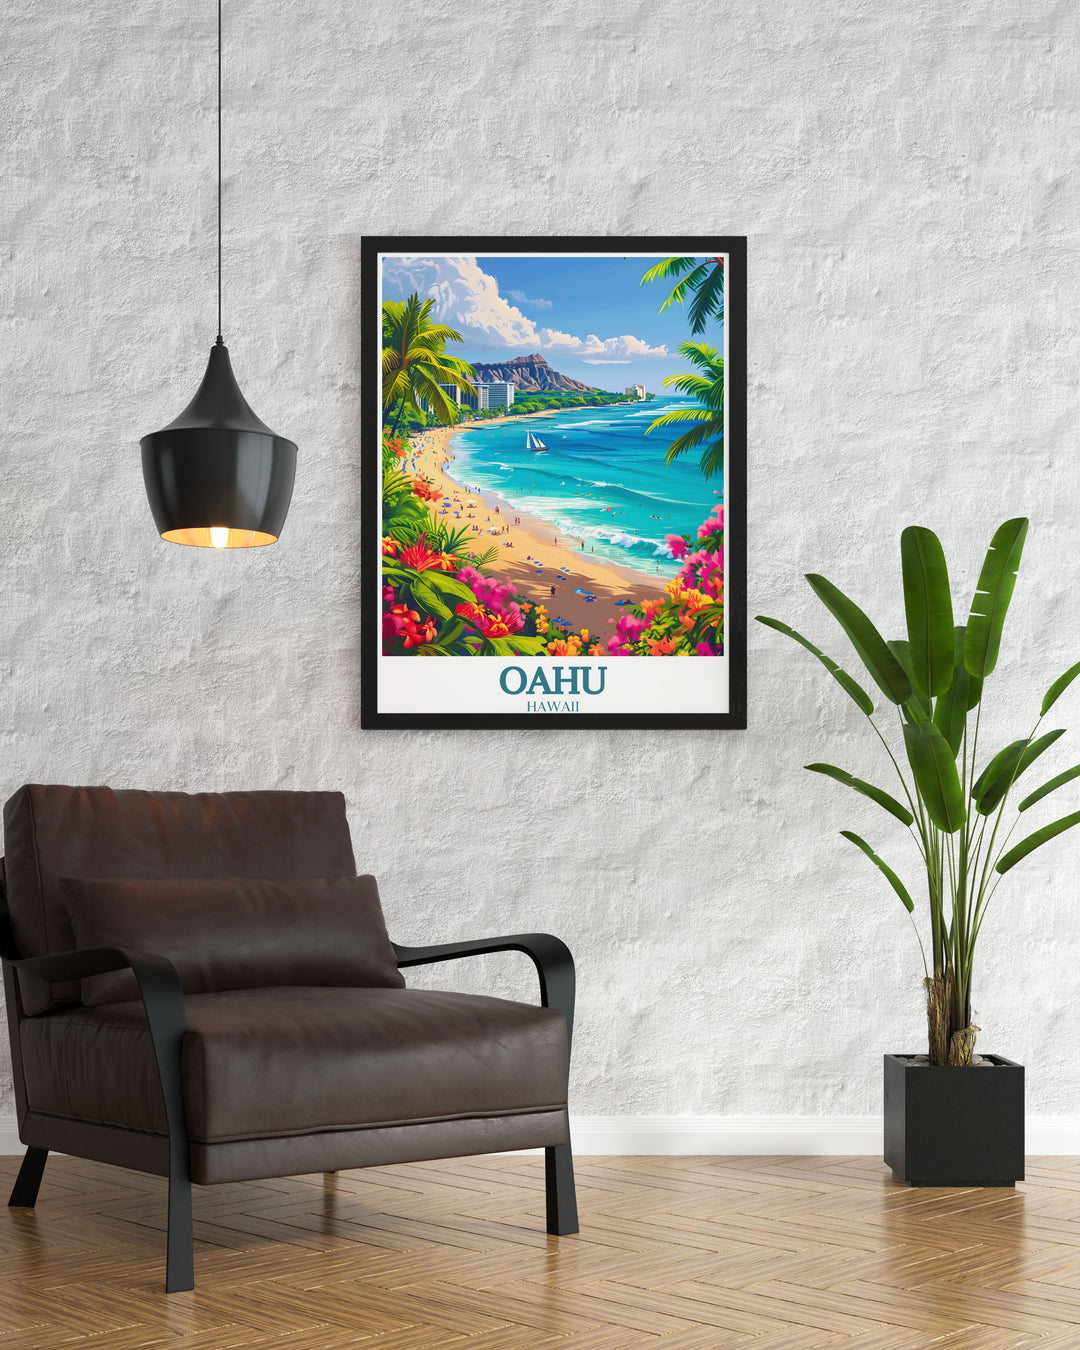 Bring a piece of Hawaii into your home with this Oahu travel poster featuring Waikiki Beach and Diamond Head Crater ideal for creating a tropical ambiance in any space.